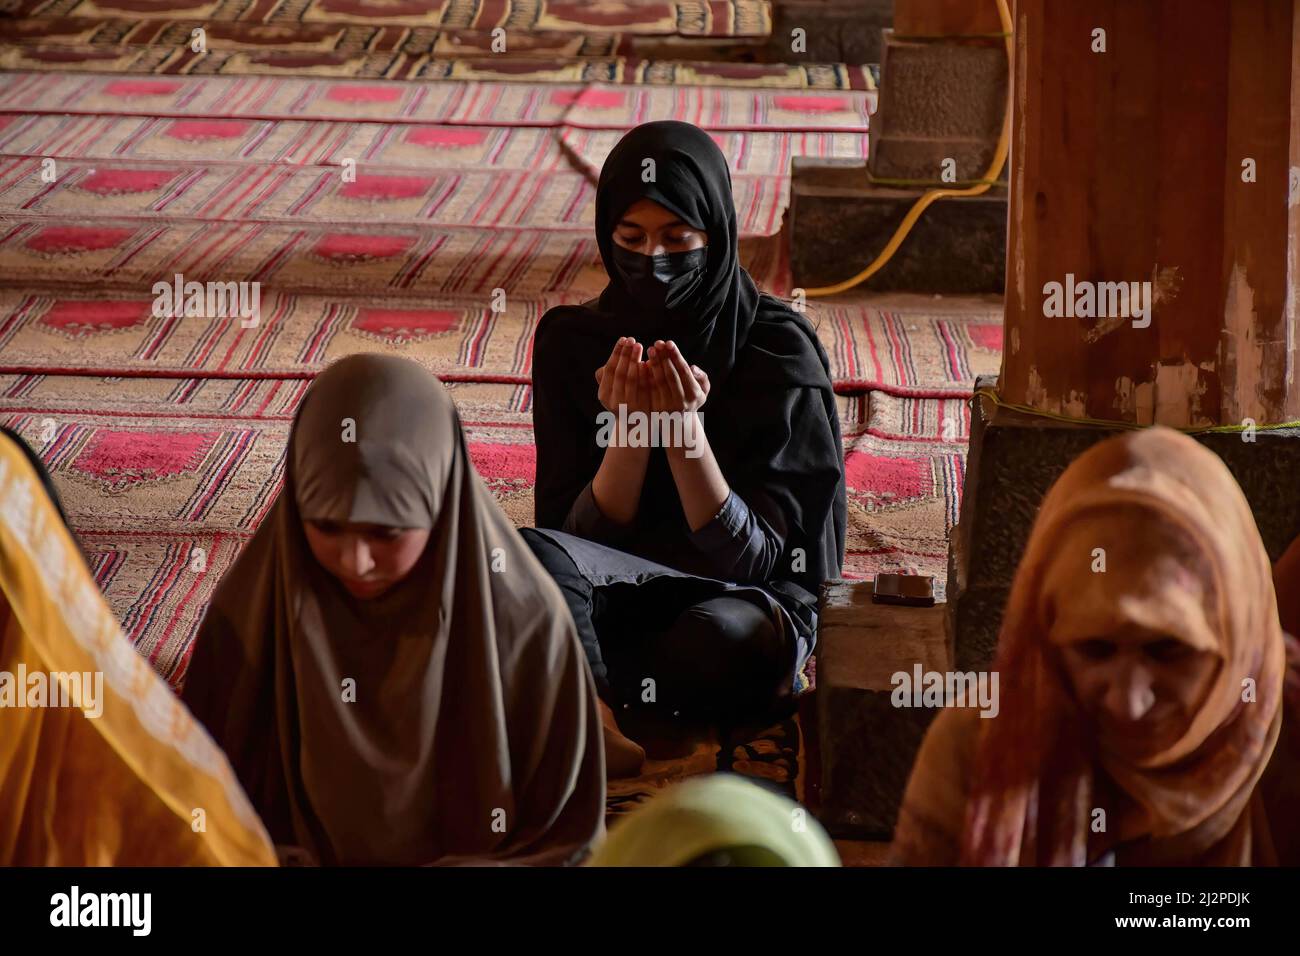 Srinagar, India. 03rd Apr, 2022. A Kashmiri girl prays inside the Jamia Masjid or Grand Mosque during the first day of Ramadan in Srinagar. Muslims throughout the world are marking the month of Ramadan, the holiest month in the Islamic calendar during which devotees fast from dawn till dusk. (Photo by Saqib Majeed/SOPA Images/Sipa USA) Credit: Sipa USA/Alamy Live News Stock Photo